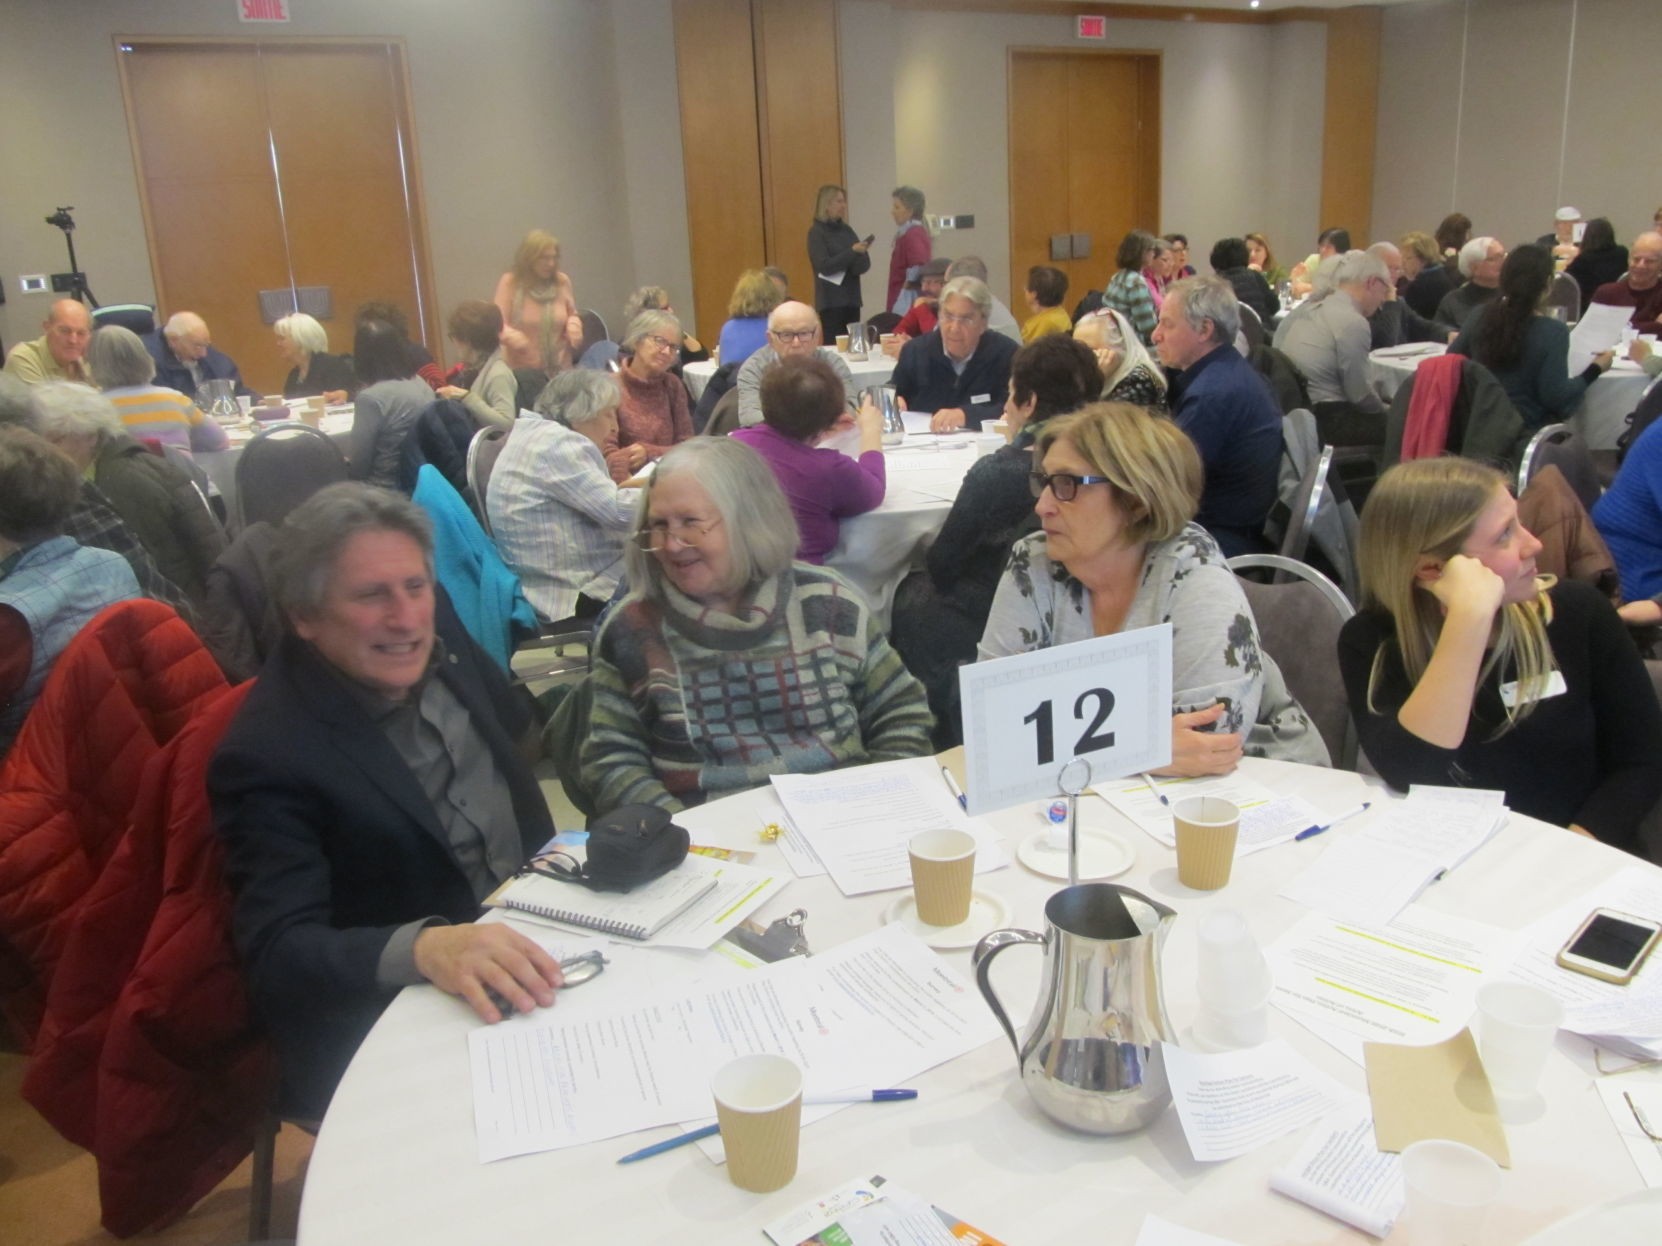 The Suburban: Anglo seniors tell municipal consultation that city ignores them